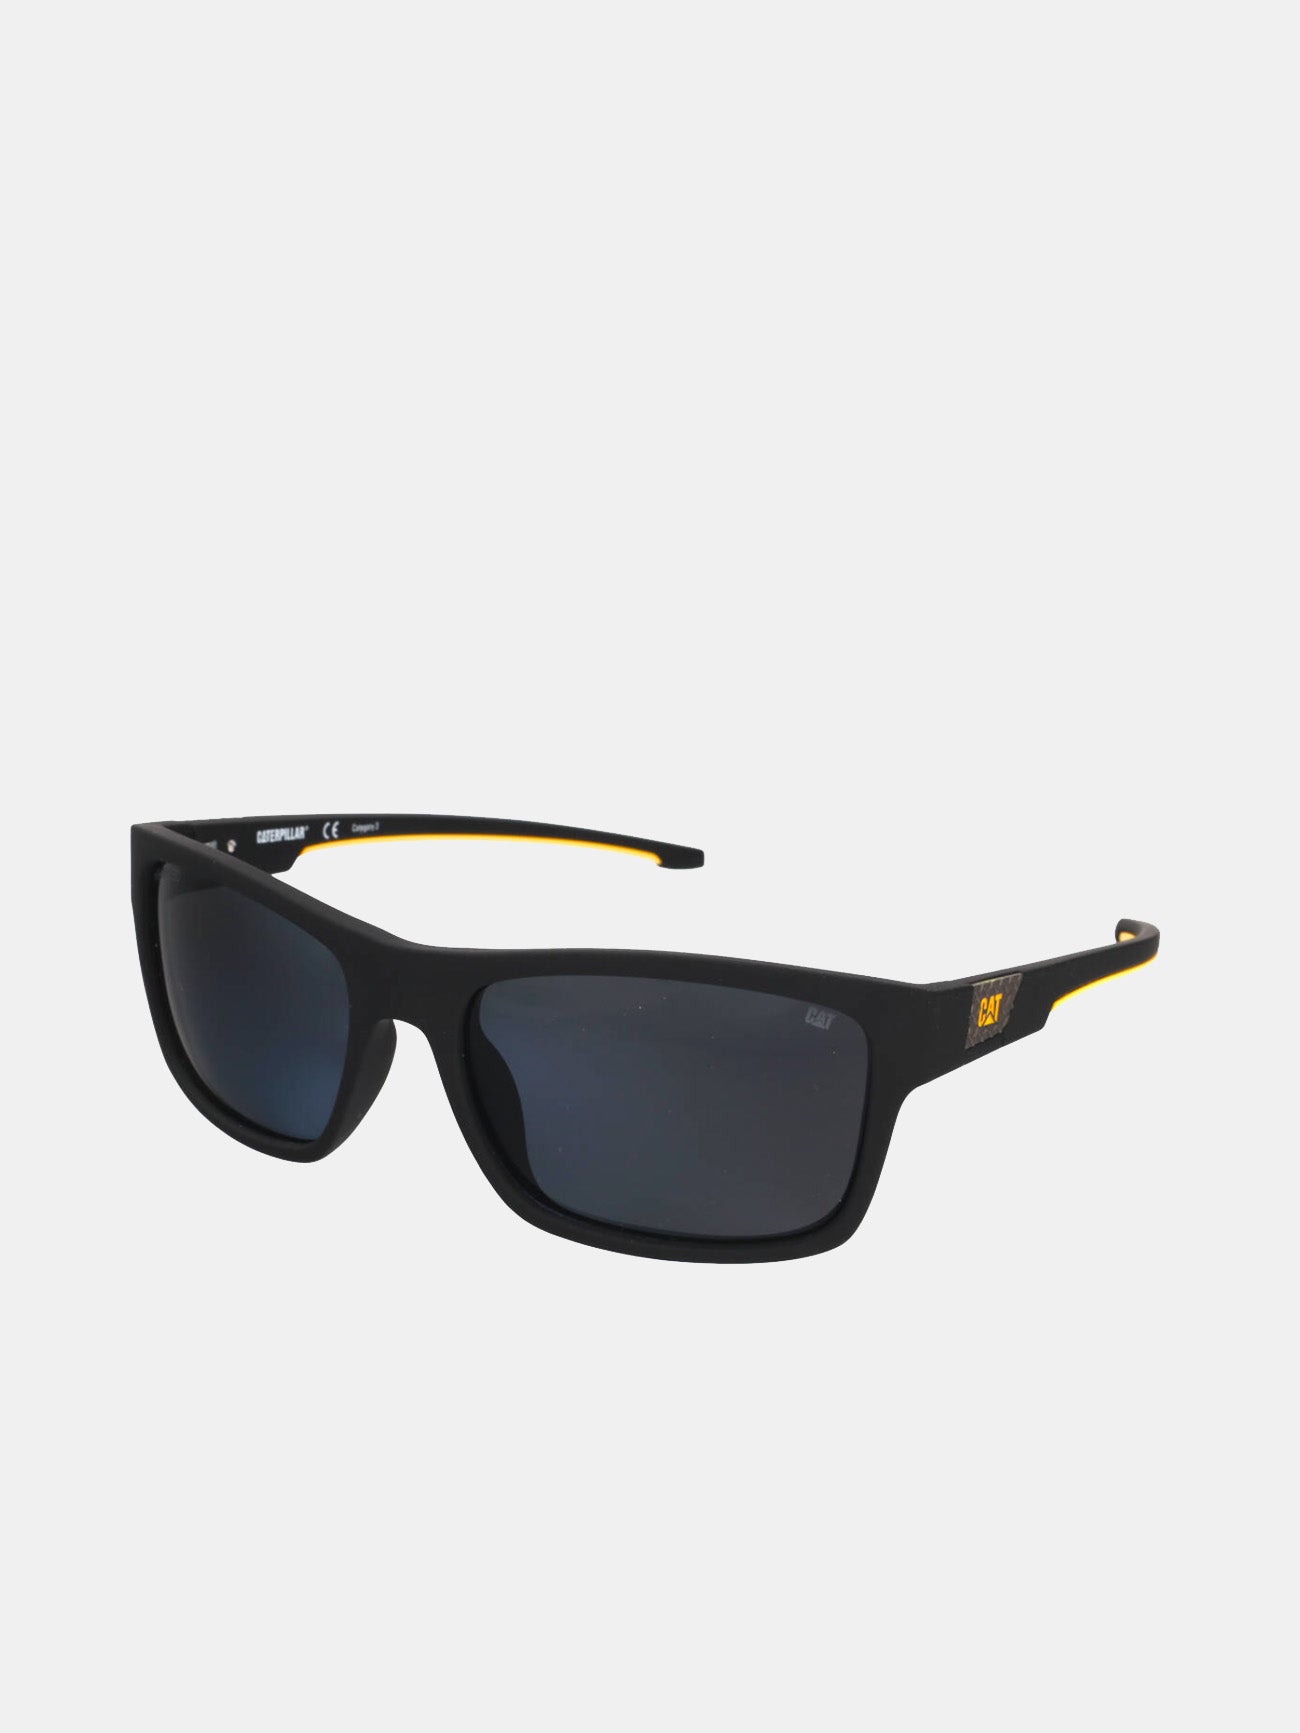 Caterpillar CTS-CODER-104P Safety Glasses